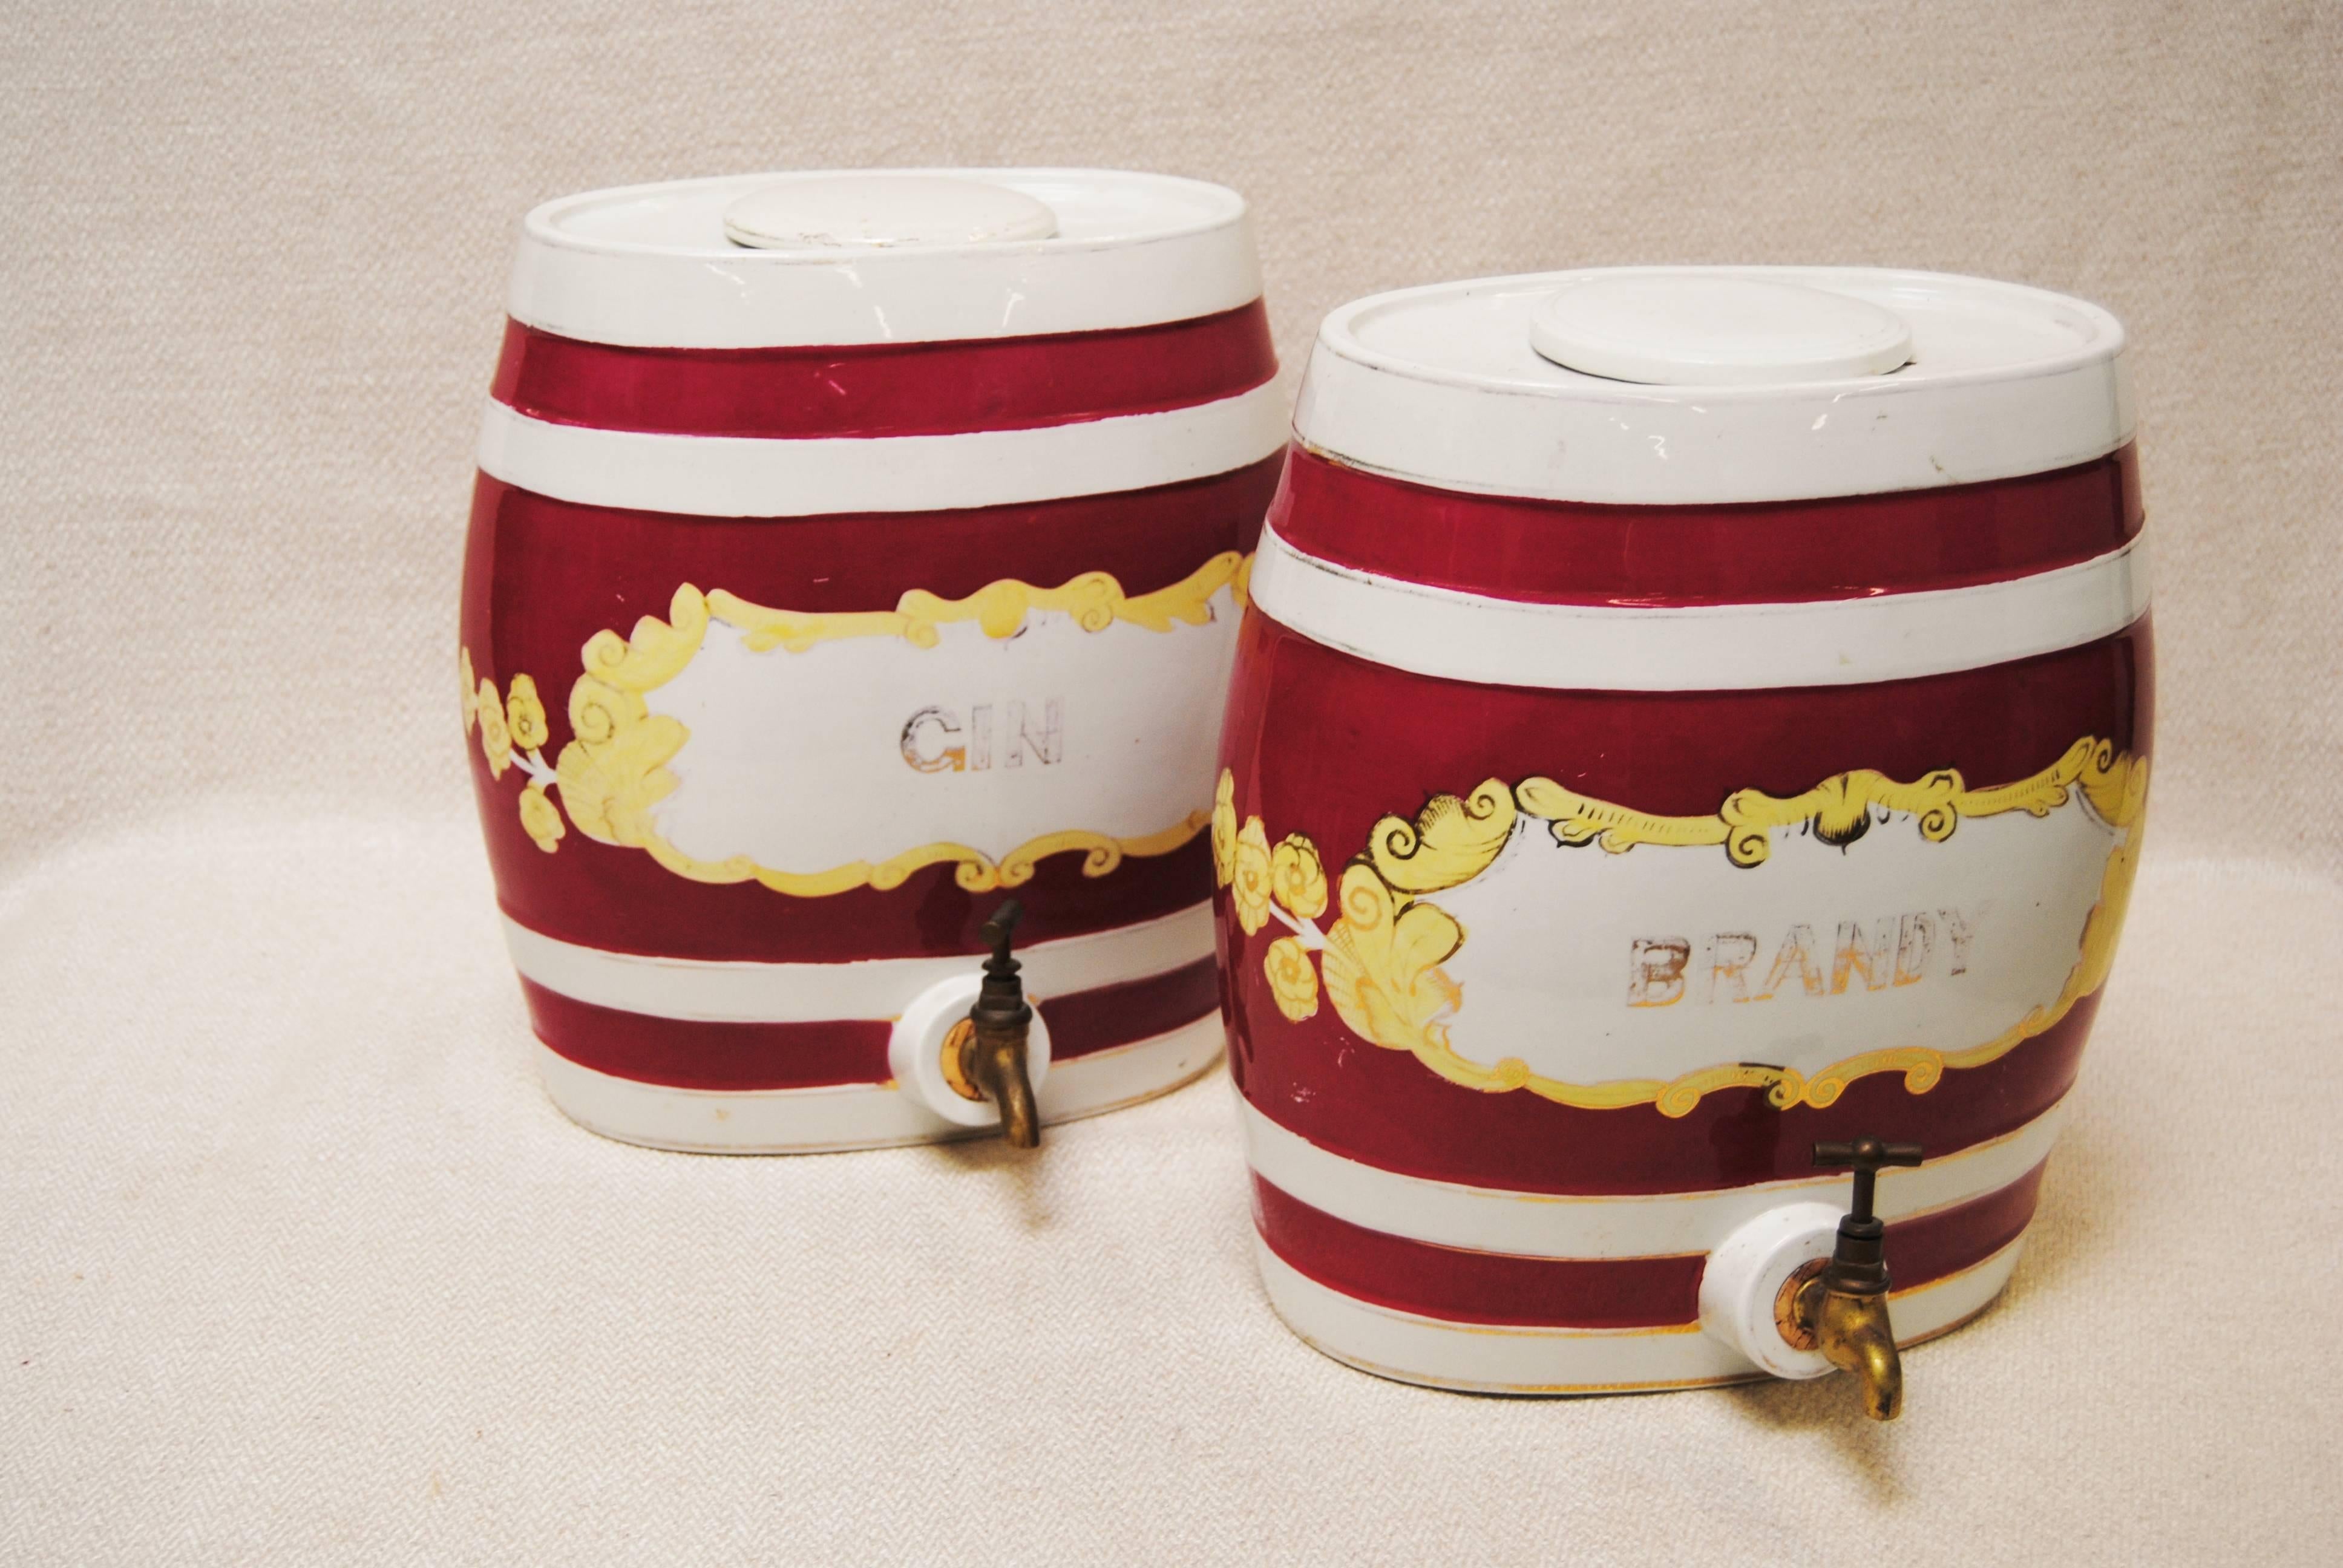 Antique English ceramic gin and brandy kegs with spout and lids.  Priced individually.